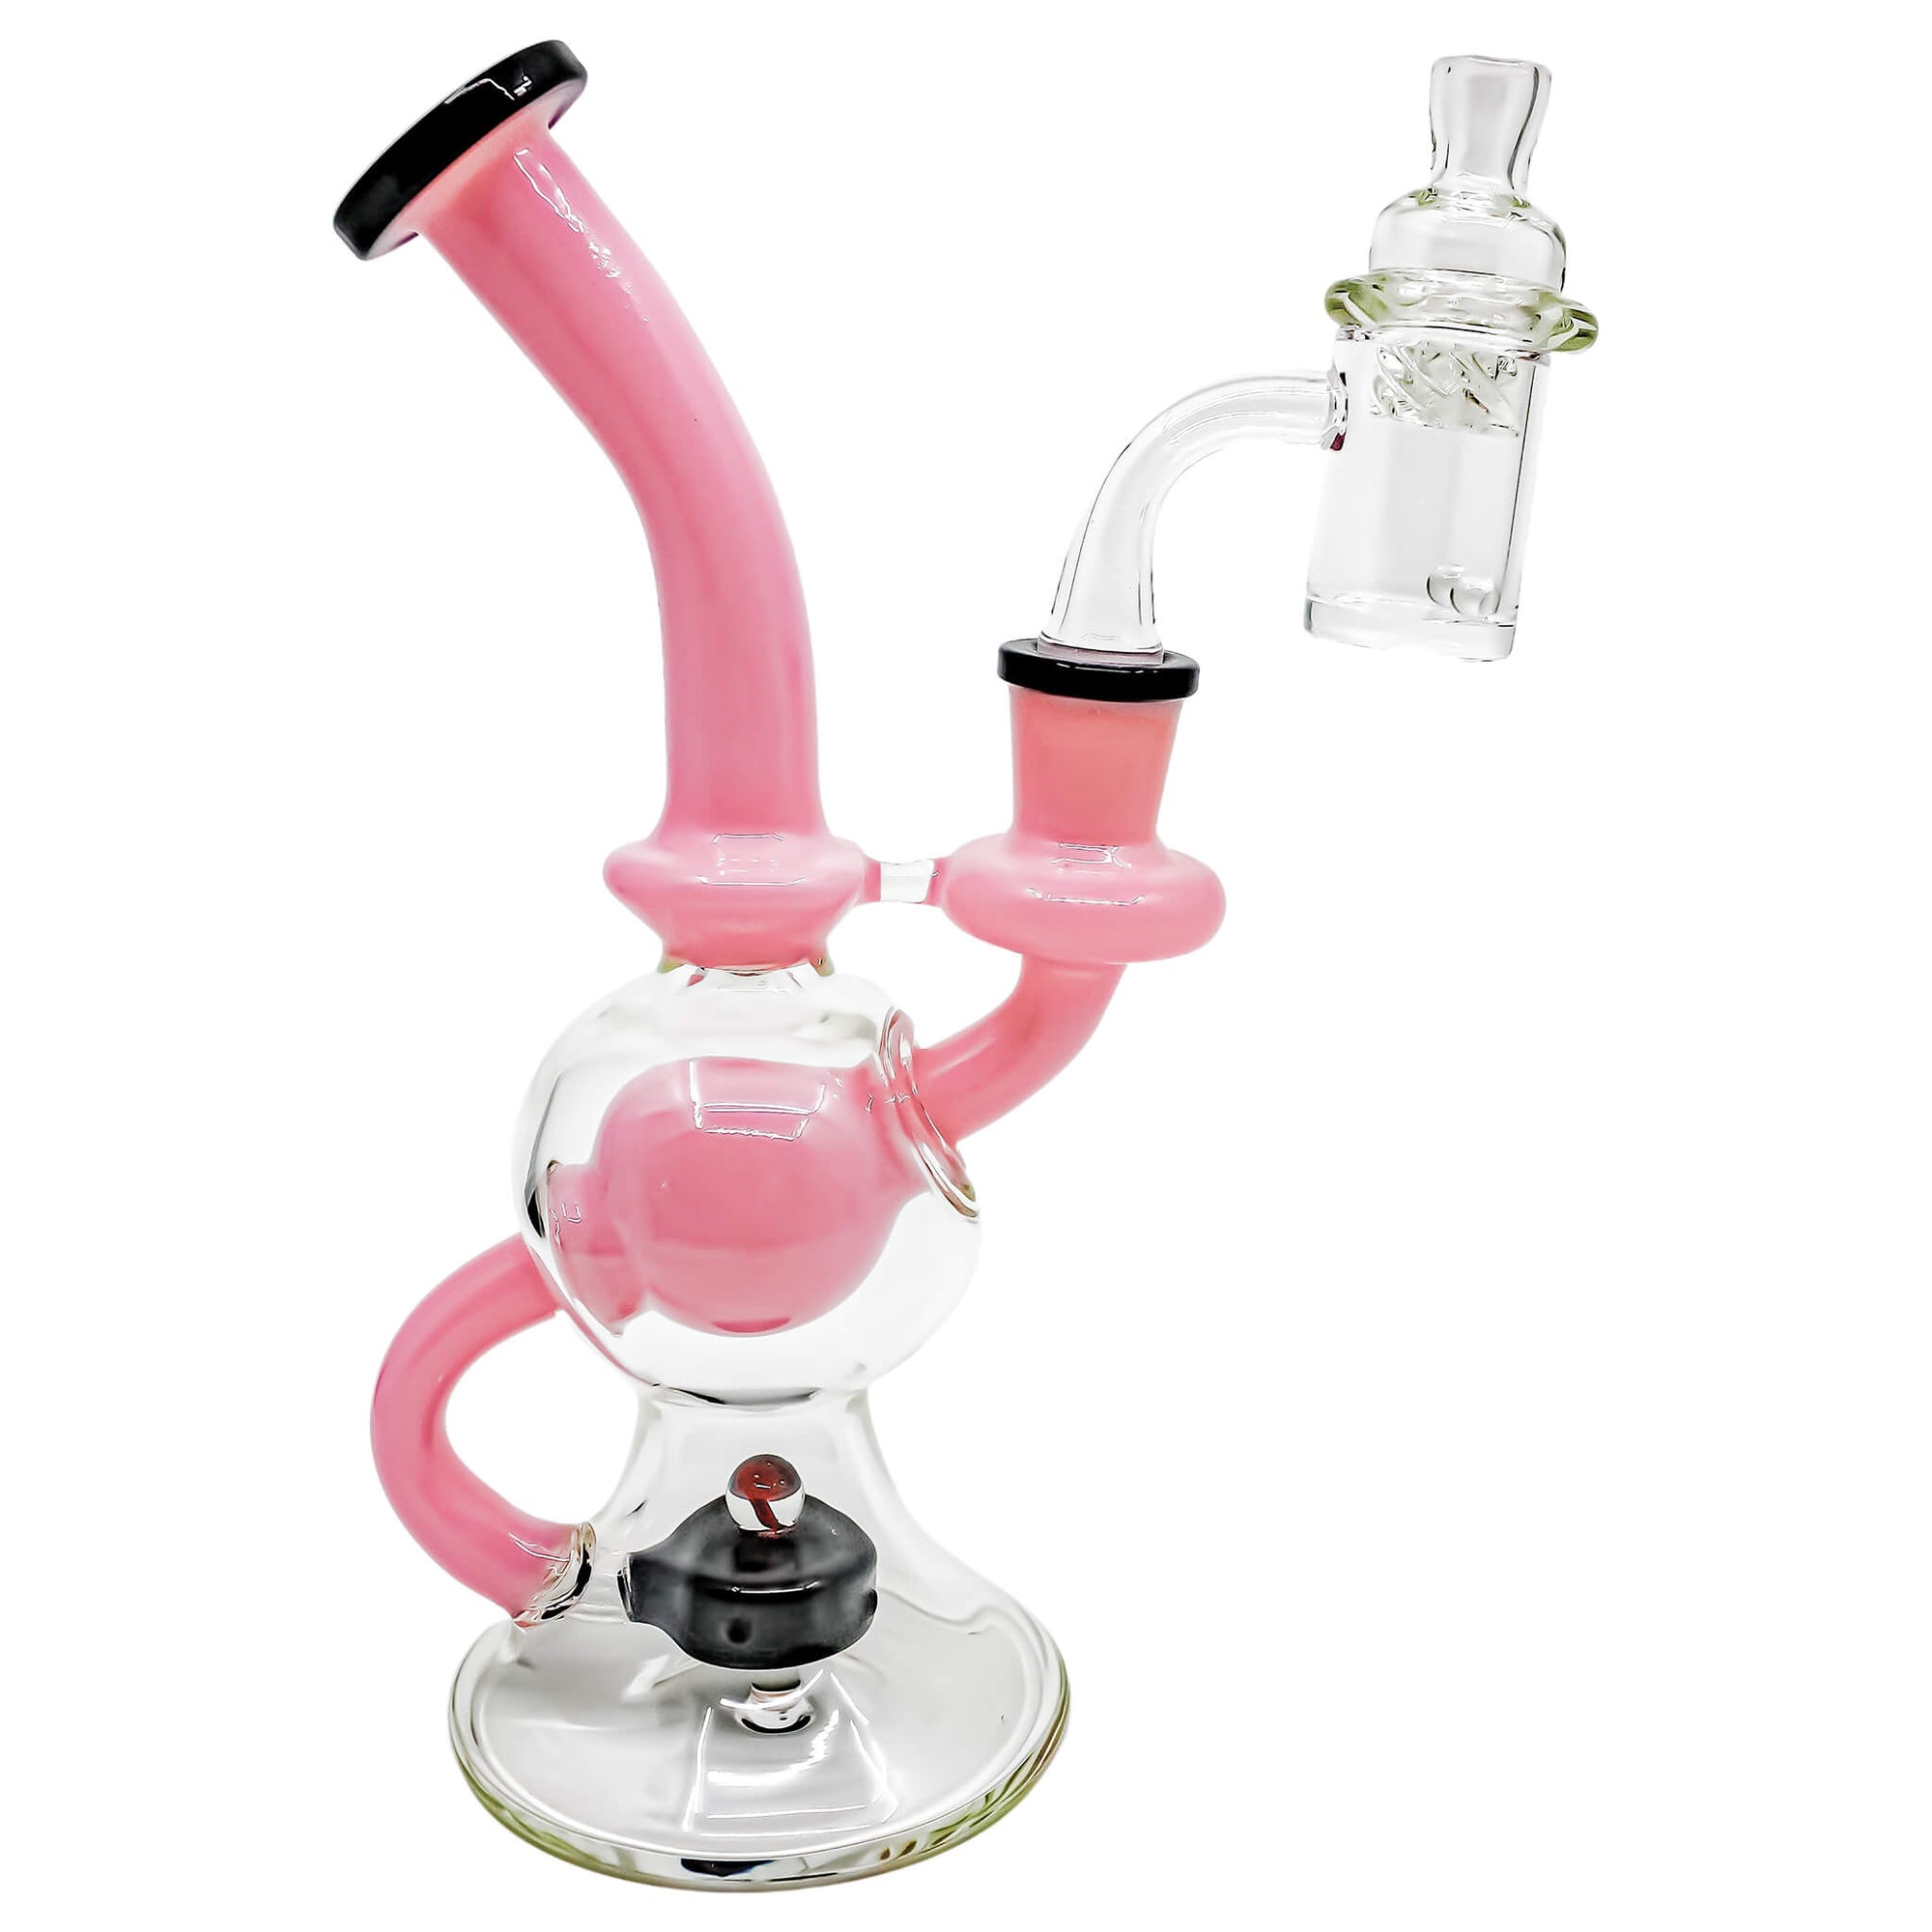 Ball Dab Rig 25mm Dab Kit | Pink Rig Kit Profile View | the dabbing specialists